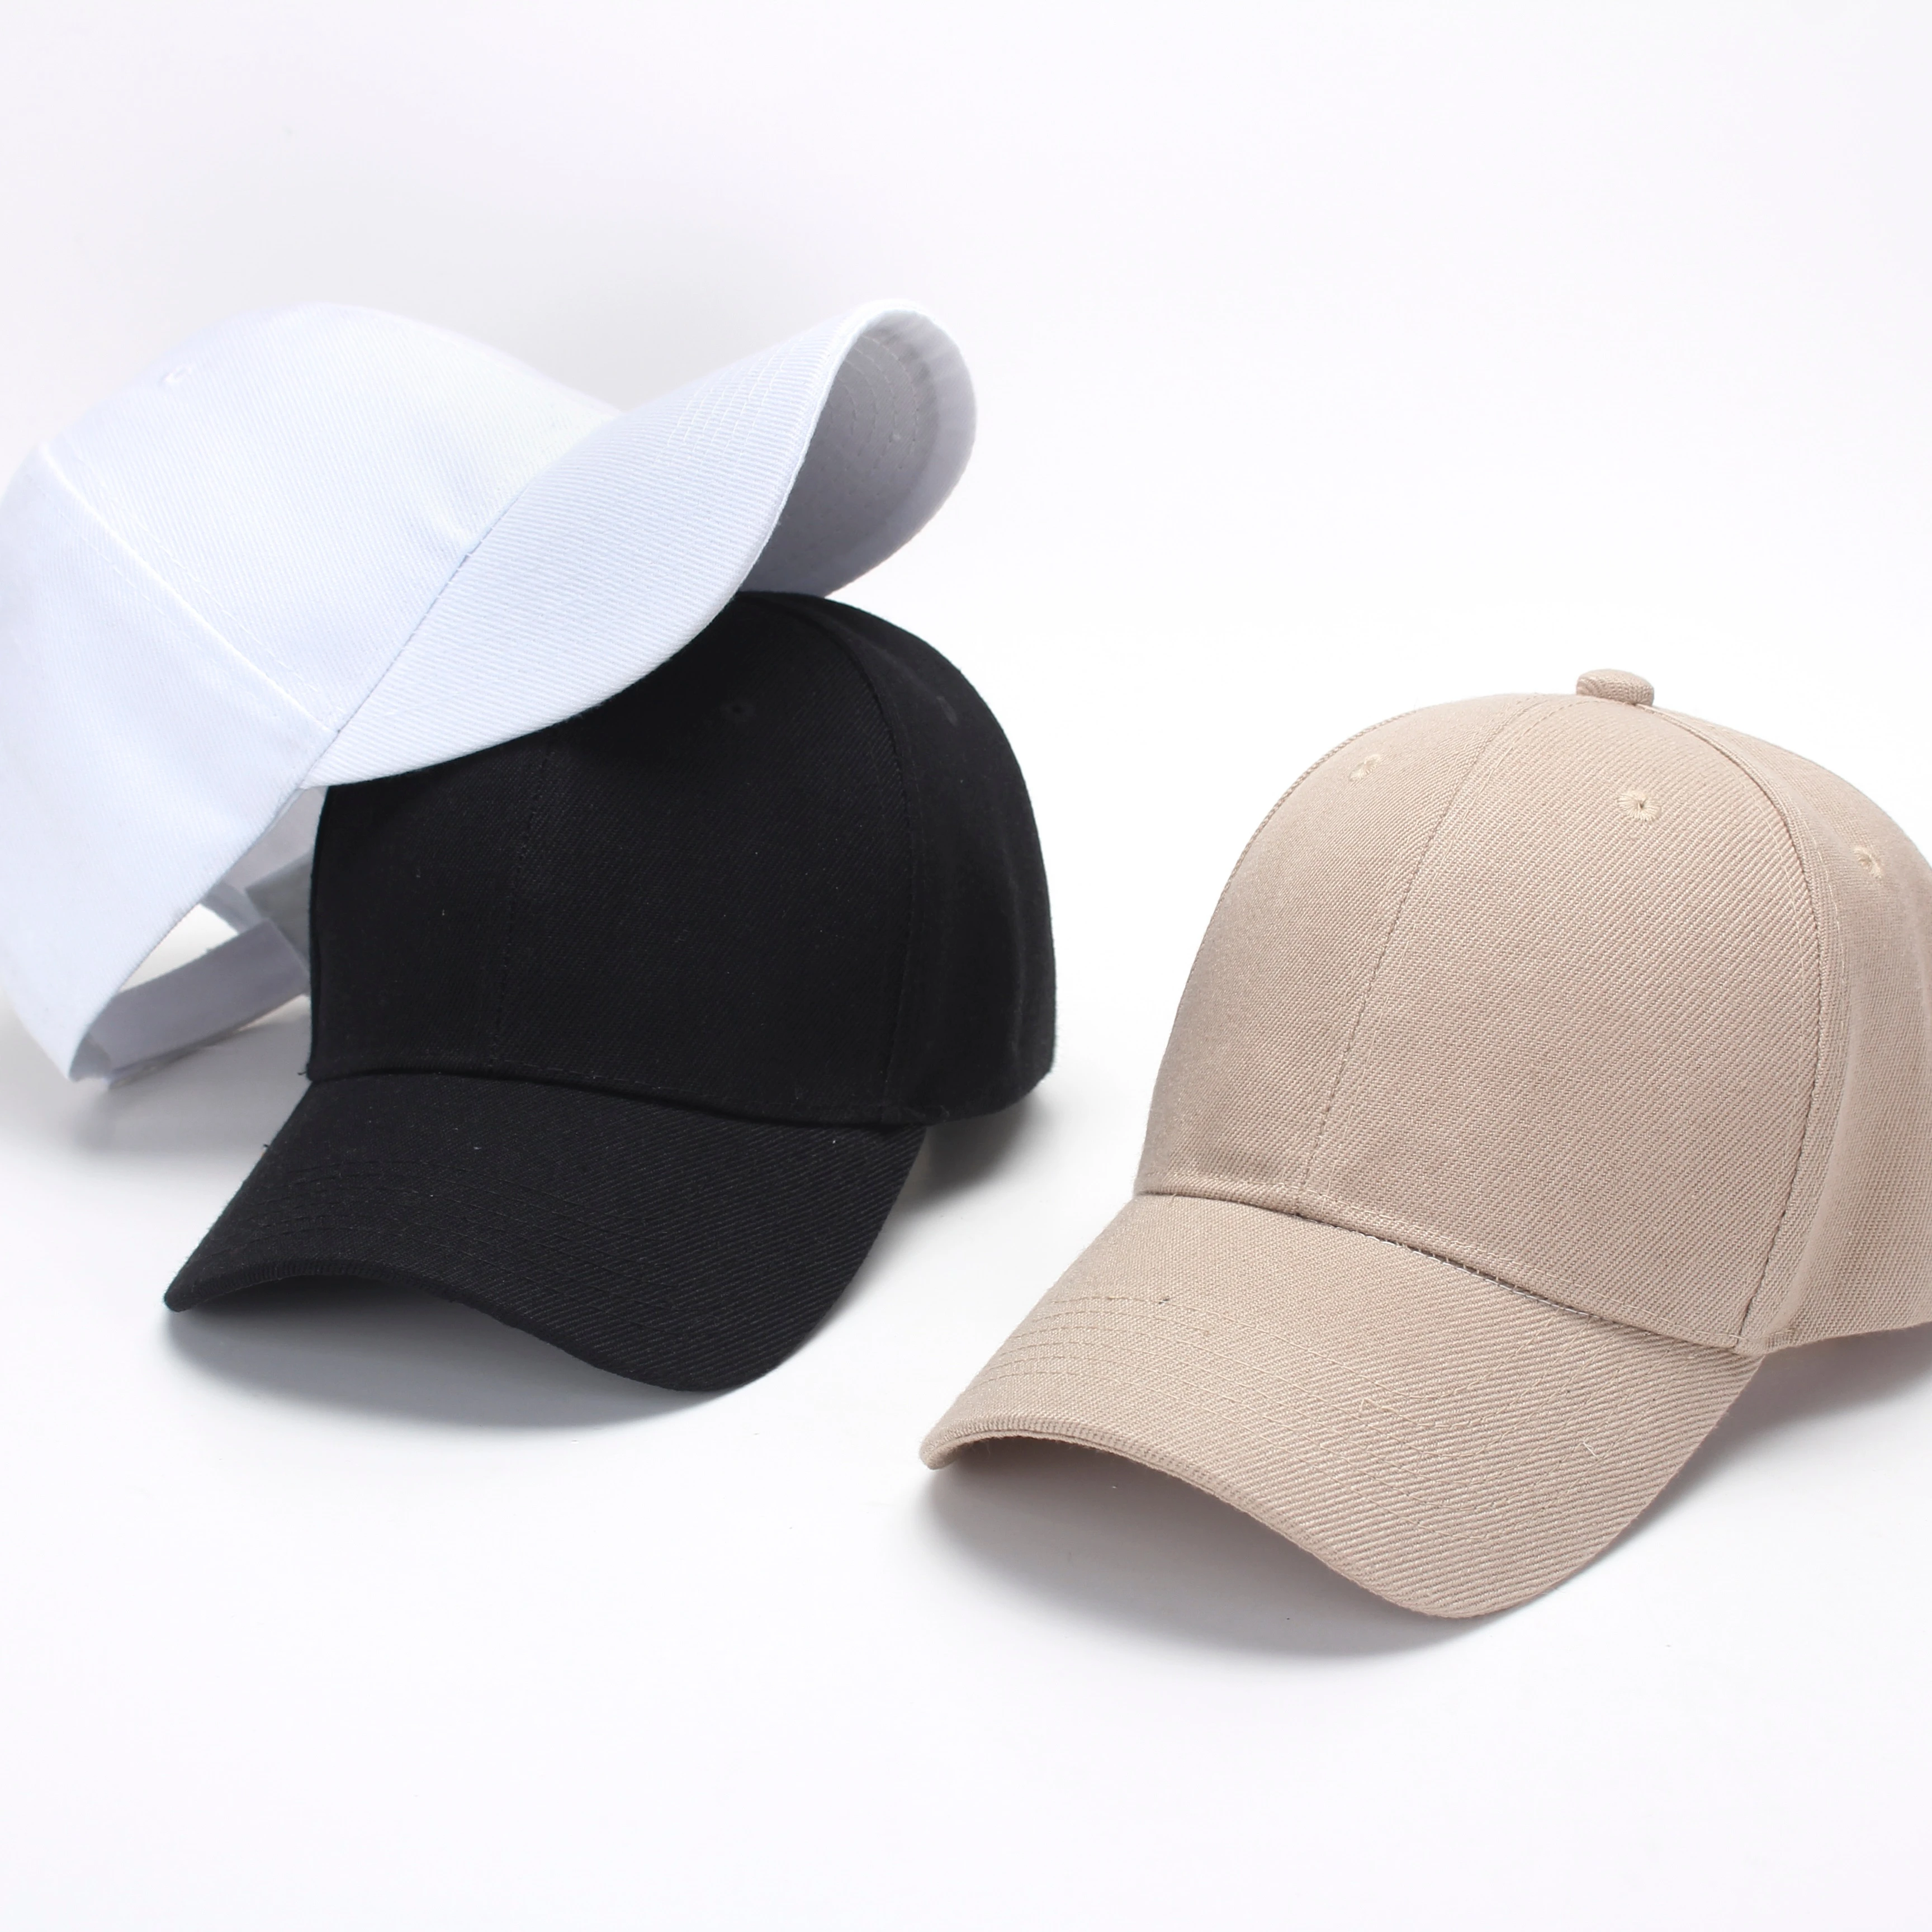 Oem Custom 6-panel Foldable Fitted Hat Plain Baseball Cap Applique  Embroidery Cap,3d Embroidery Cap - Buy Cheap Baseball Caps,Plain White Baseball  Caps,3d Embroidery Cap Product on Alibaba.com